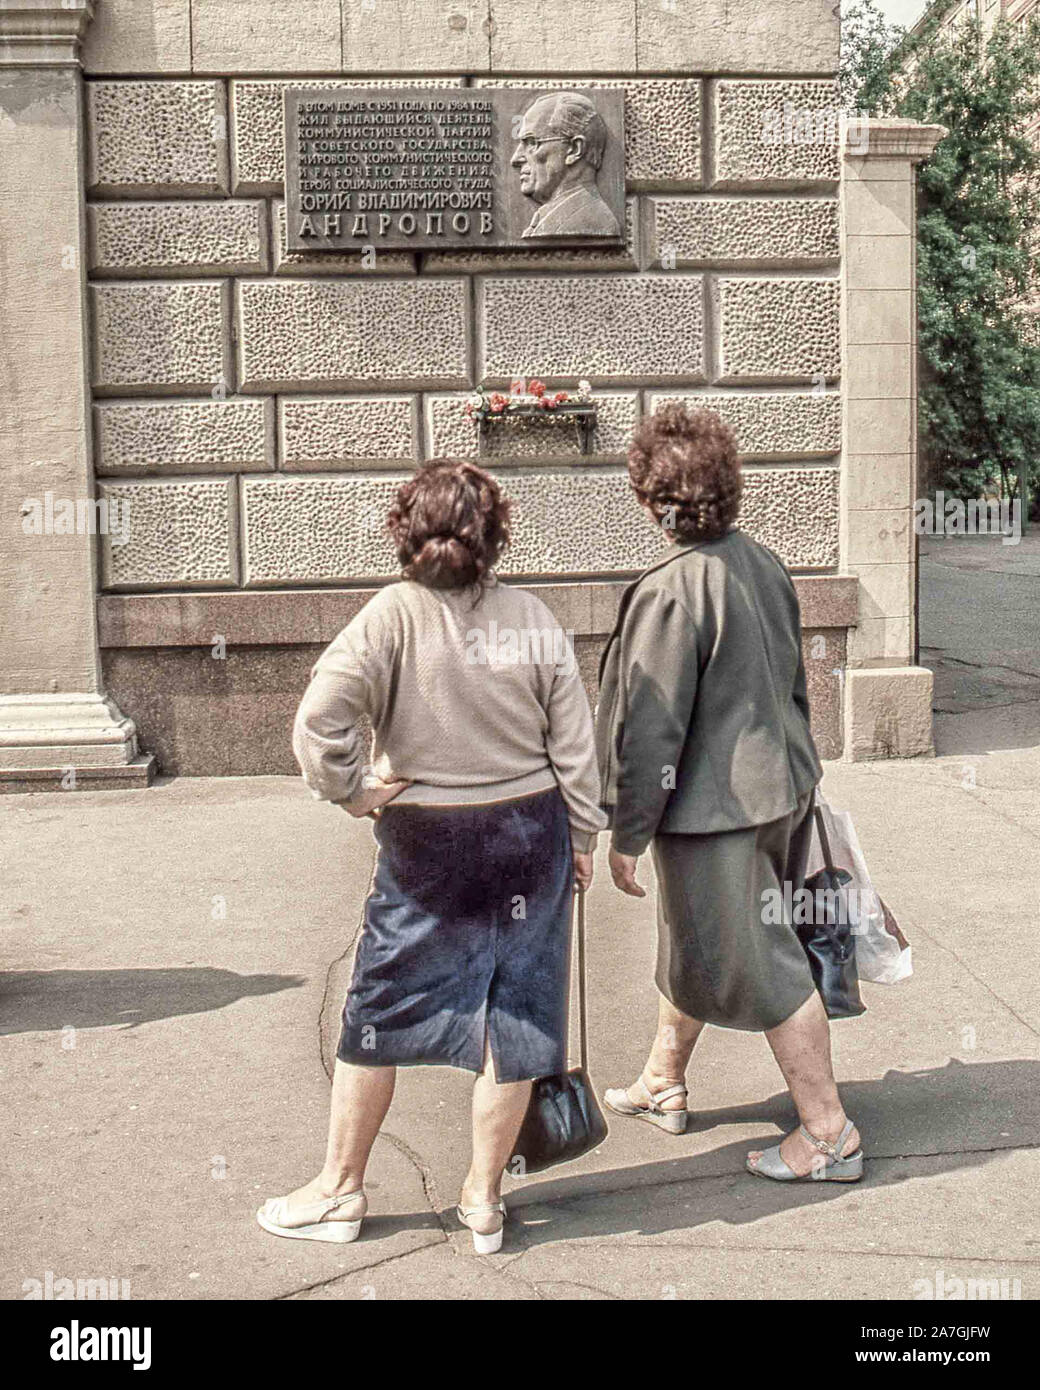 February 1, 1989, Moscow, Russia: Two Moscow women view the commemorative plaque and a shelf of flowers, on the wall of a stately Moscow apartment building at 26 Kutuzovsky Prospect (where he and other Soviet leaders lived) honoring Yuri V. Andropov. A former head of the KGB, he was General Secretary of the Communist Party of the Soviet Union from November 1982 until his death in February 1984. (Credit Image: © Arnold Drapkin/ZUMA Wire) Stock Photo